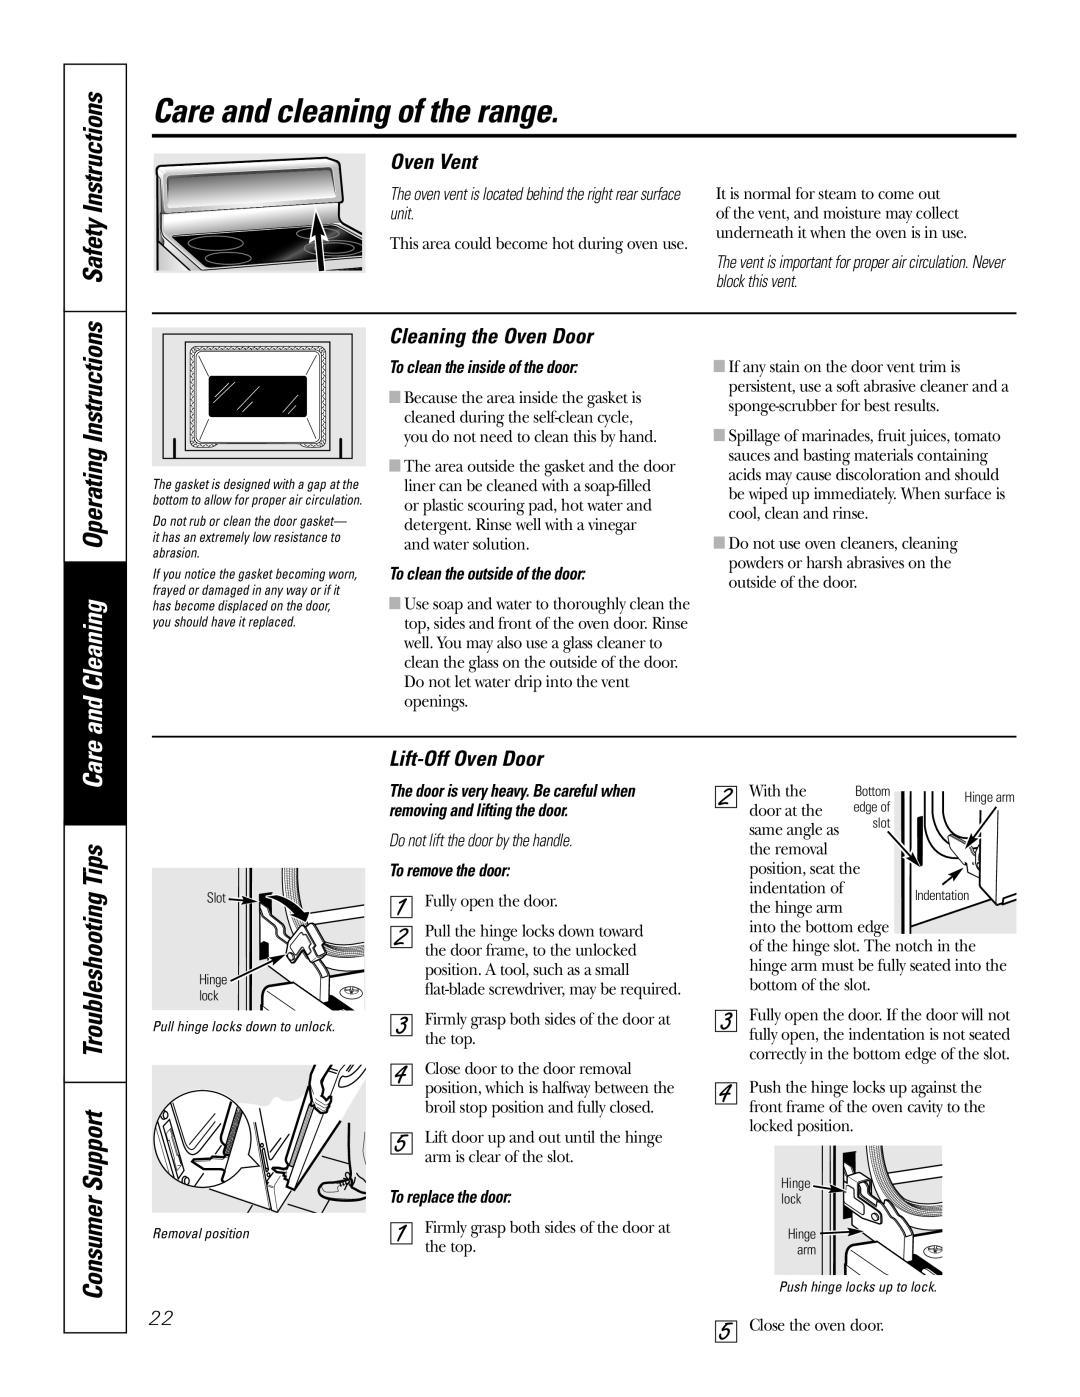 GE JBP64 and Cleaning Operating Instructions, Consumer Support Troubleshooting Tips Care, Oven Vent, Lift-Off Oven Door 